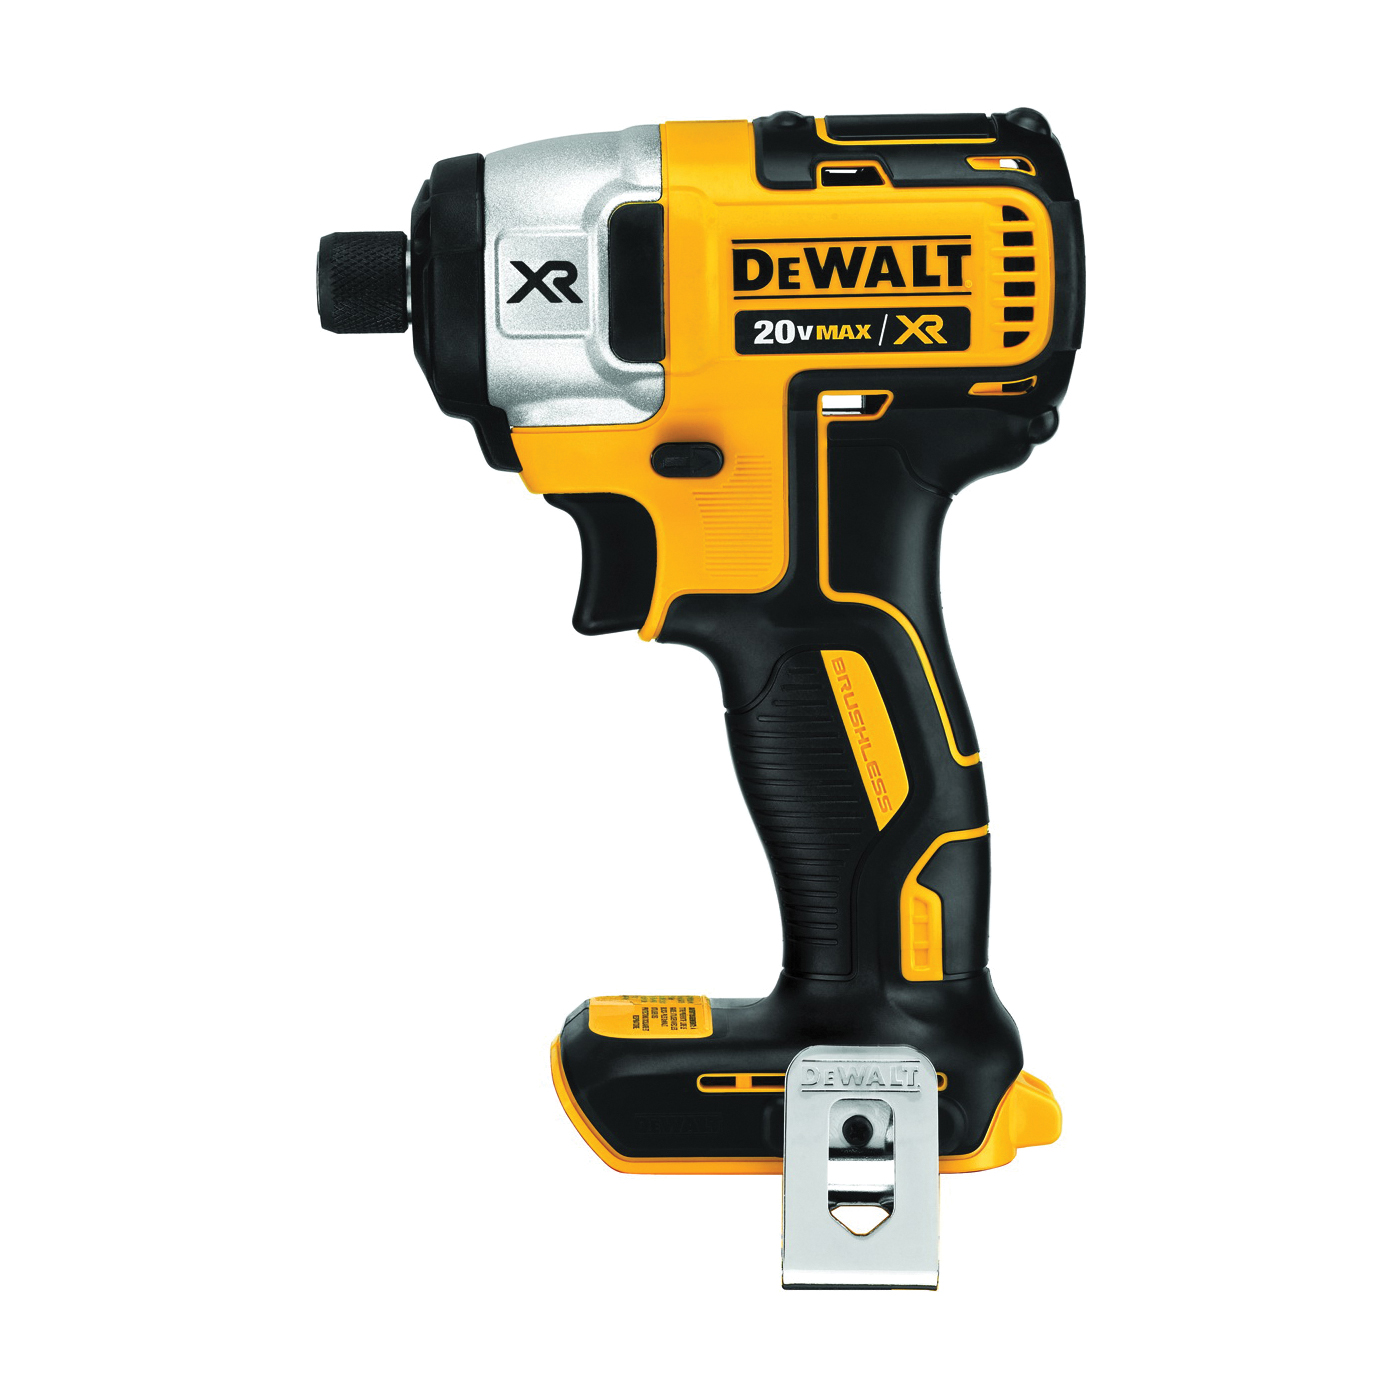 DeWALT DCF887B/DCF886B Impact Driver, Tool Only, 20 V, 2 Ah, 1/4 in Drive, Hex Drive, 3800 ipm, 0 to 3250 rpm Speed - 1